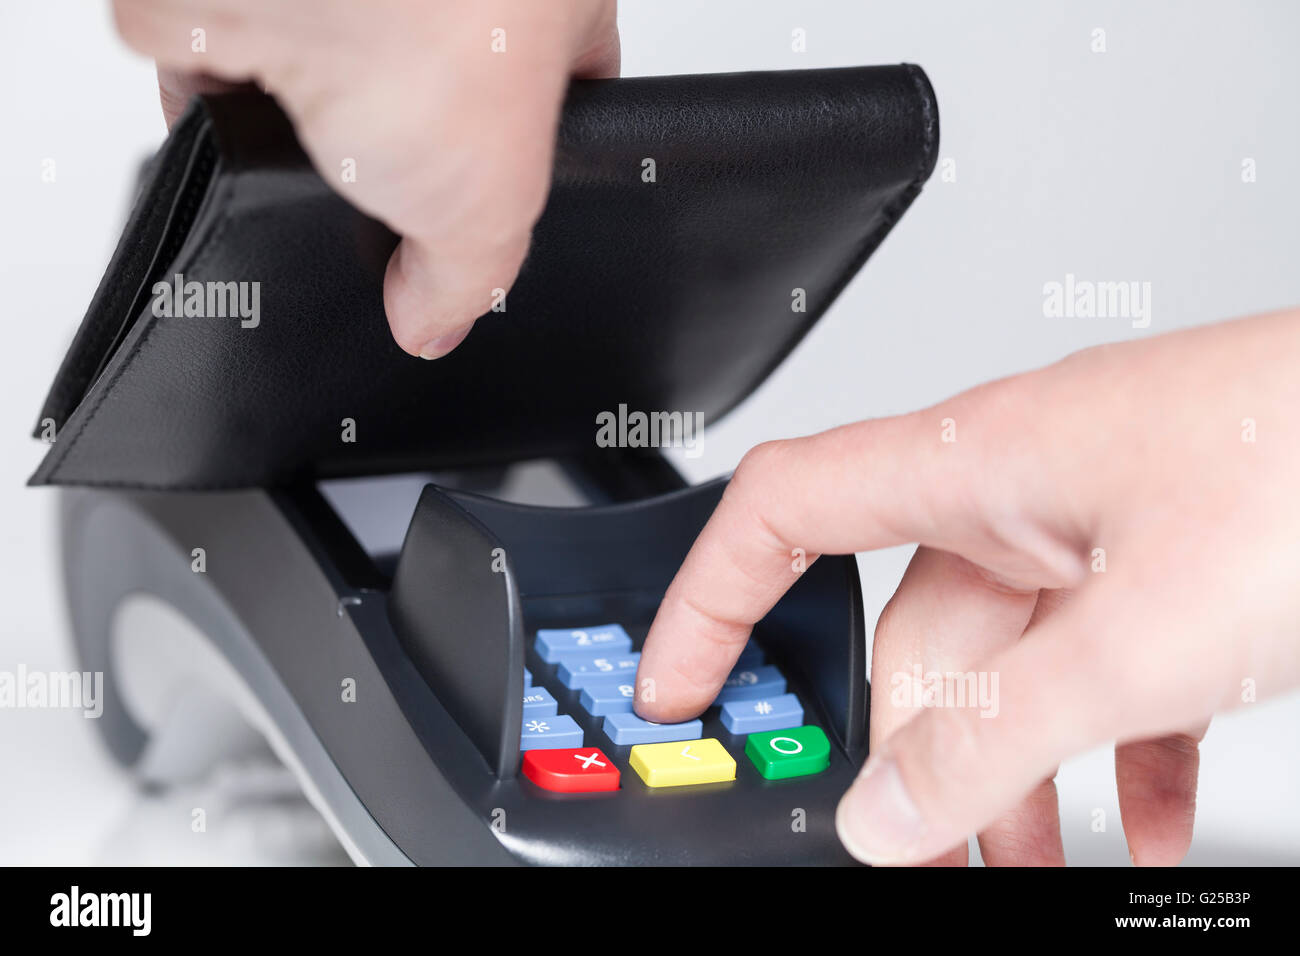 Entering code in a card reader and hiding with purse Stock Photo